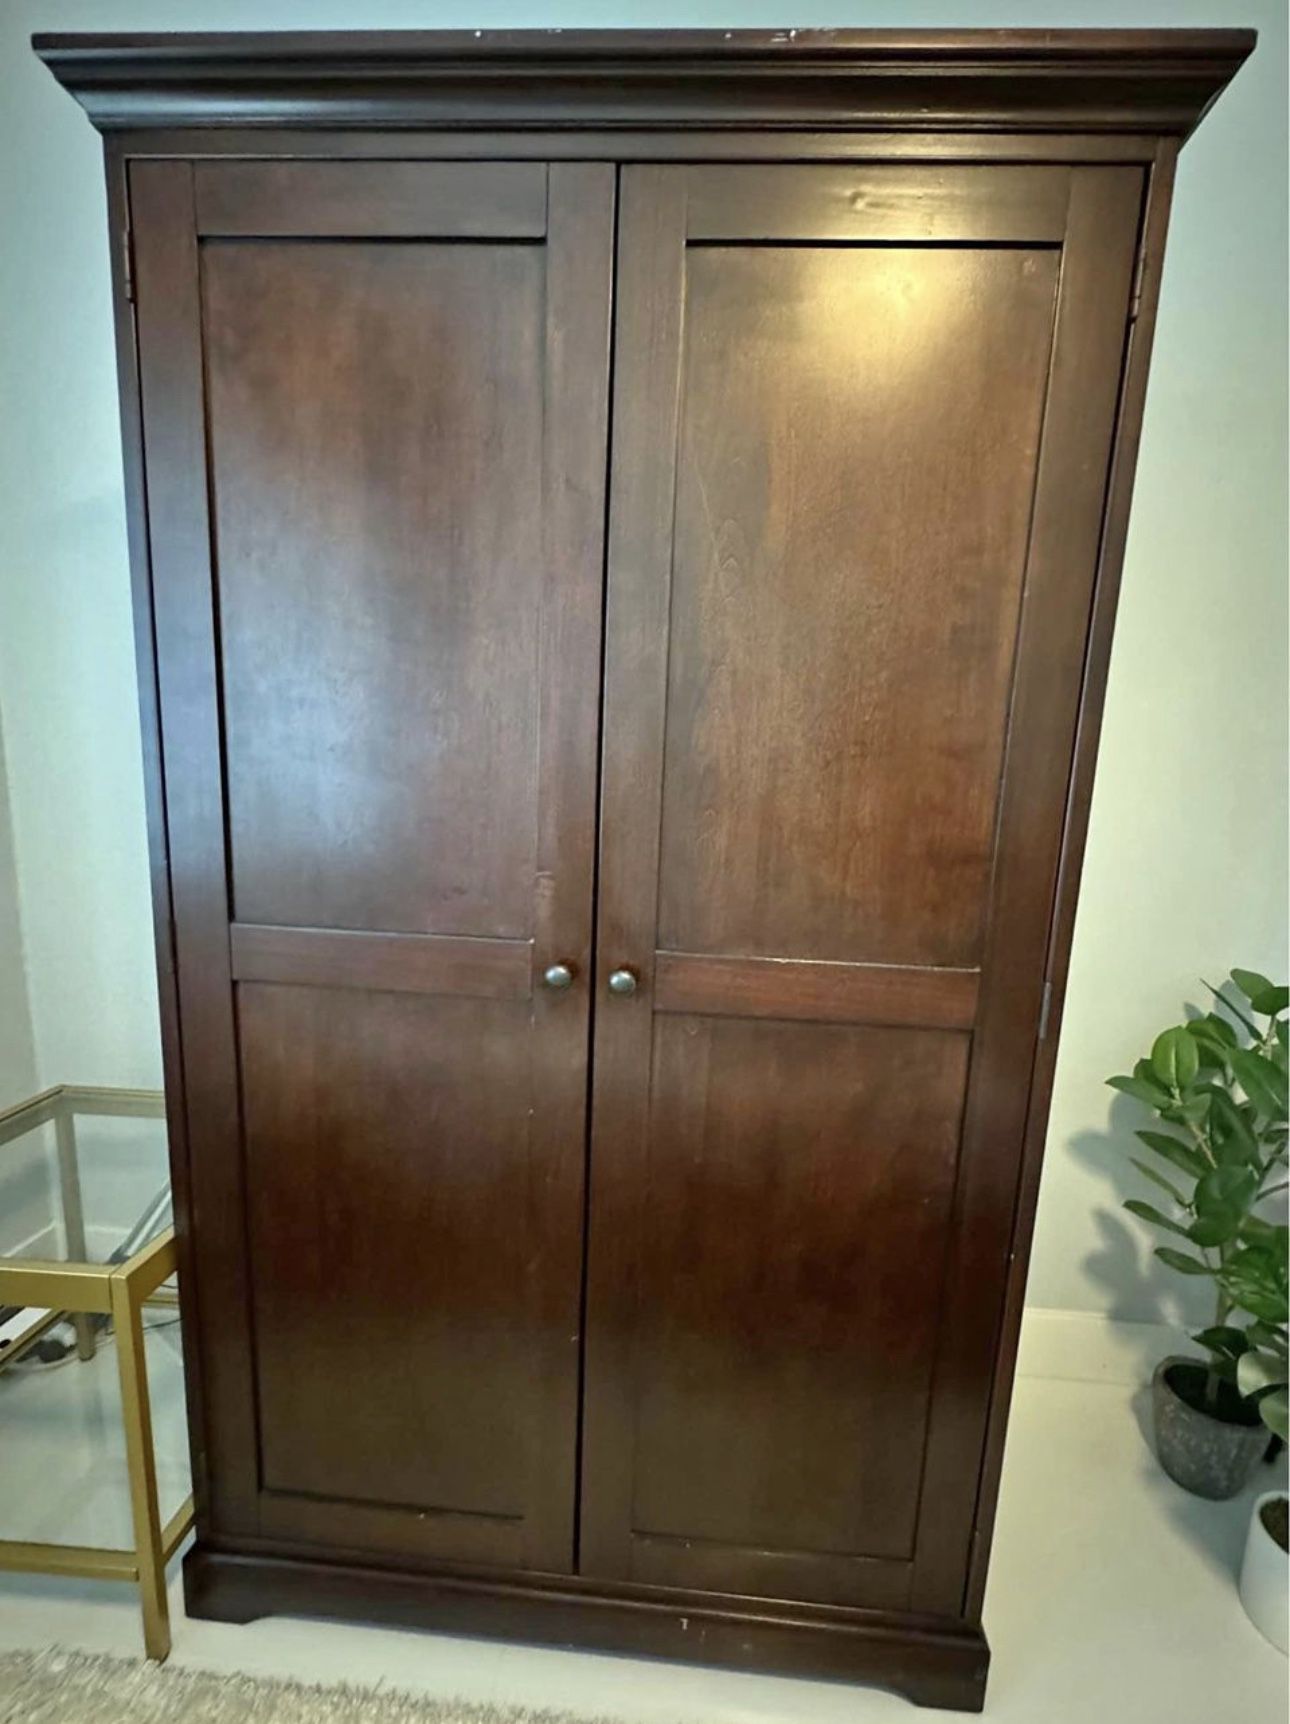 Armoire From Restoration Hardware—-$70